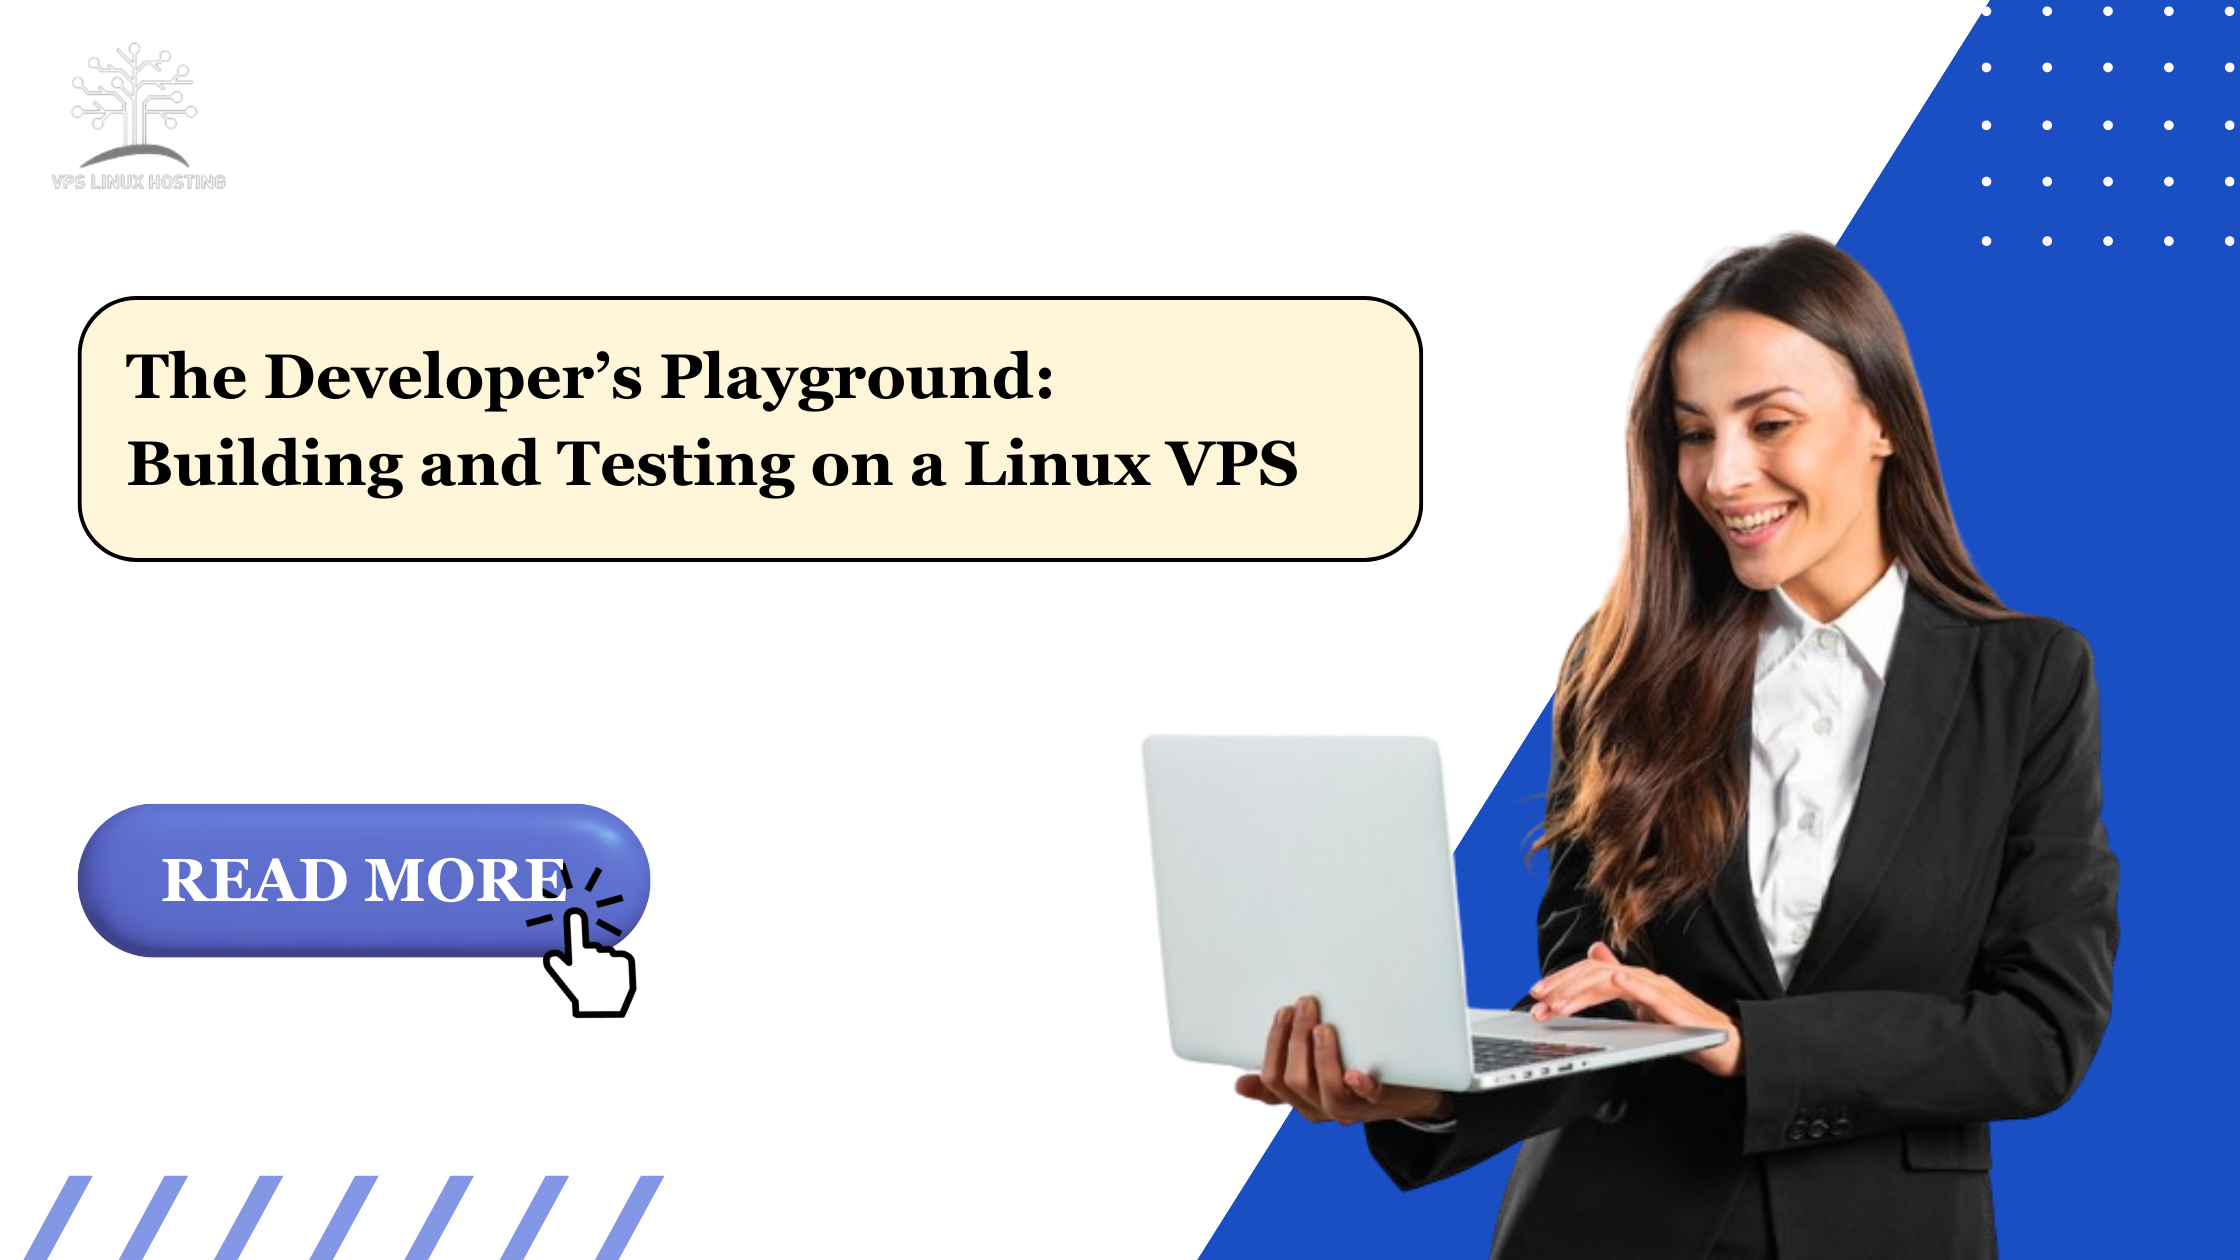 The Developer’s Playground: Building and Testing on a Linux VPS